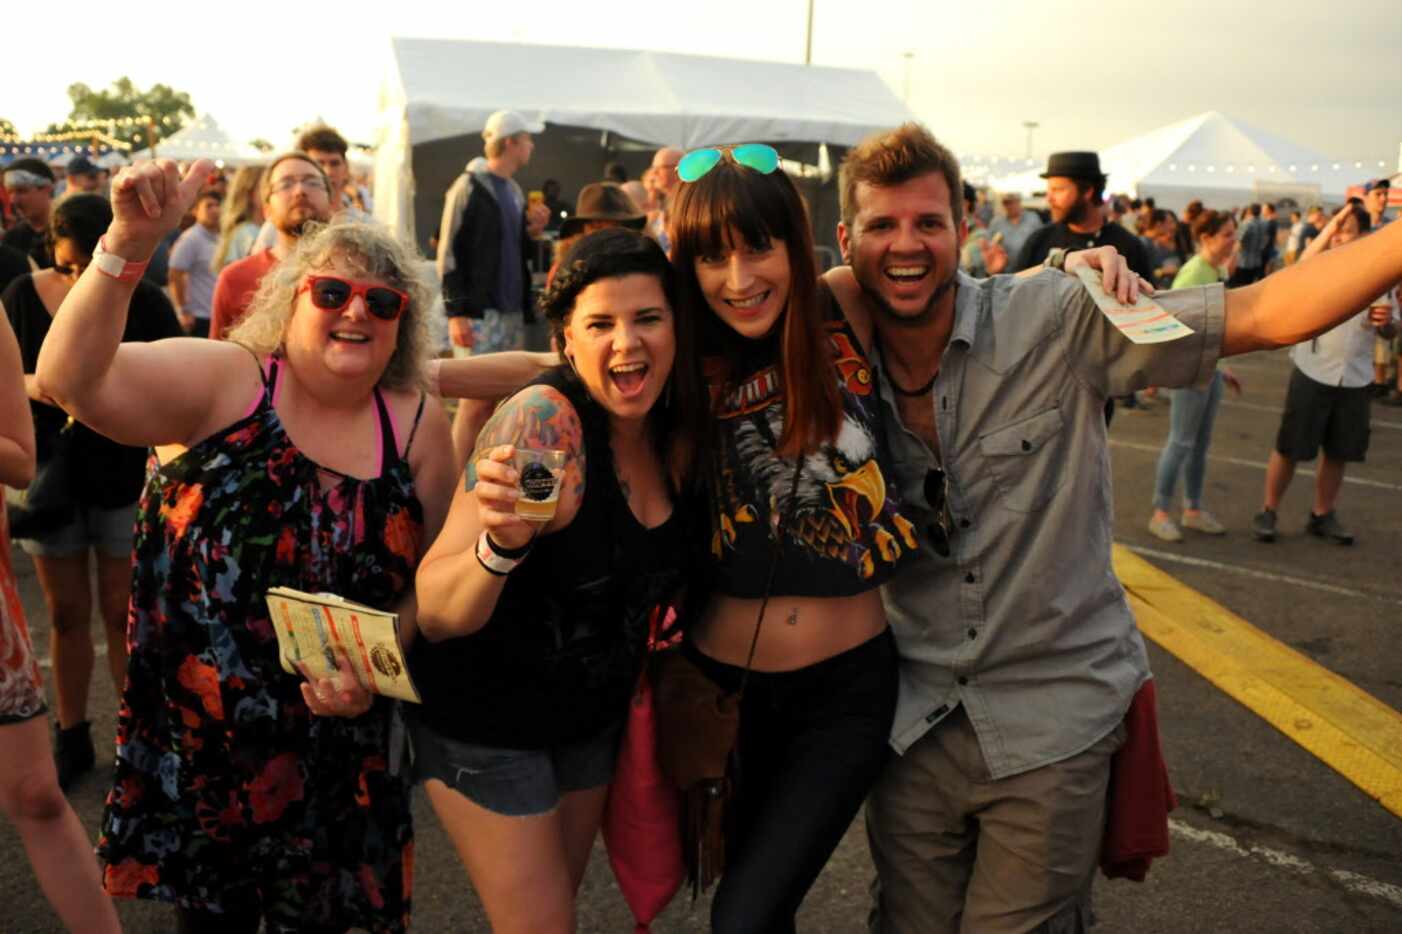 Friends drink craft beer at Untapped Festival in Fort Worth, TX on May 9, 2015.